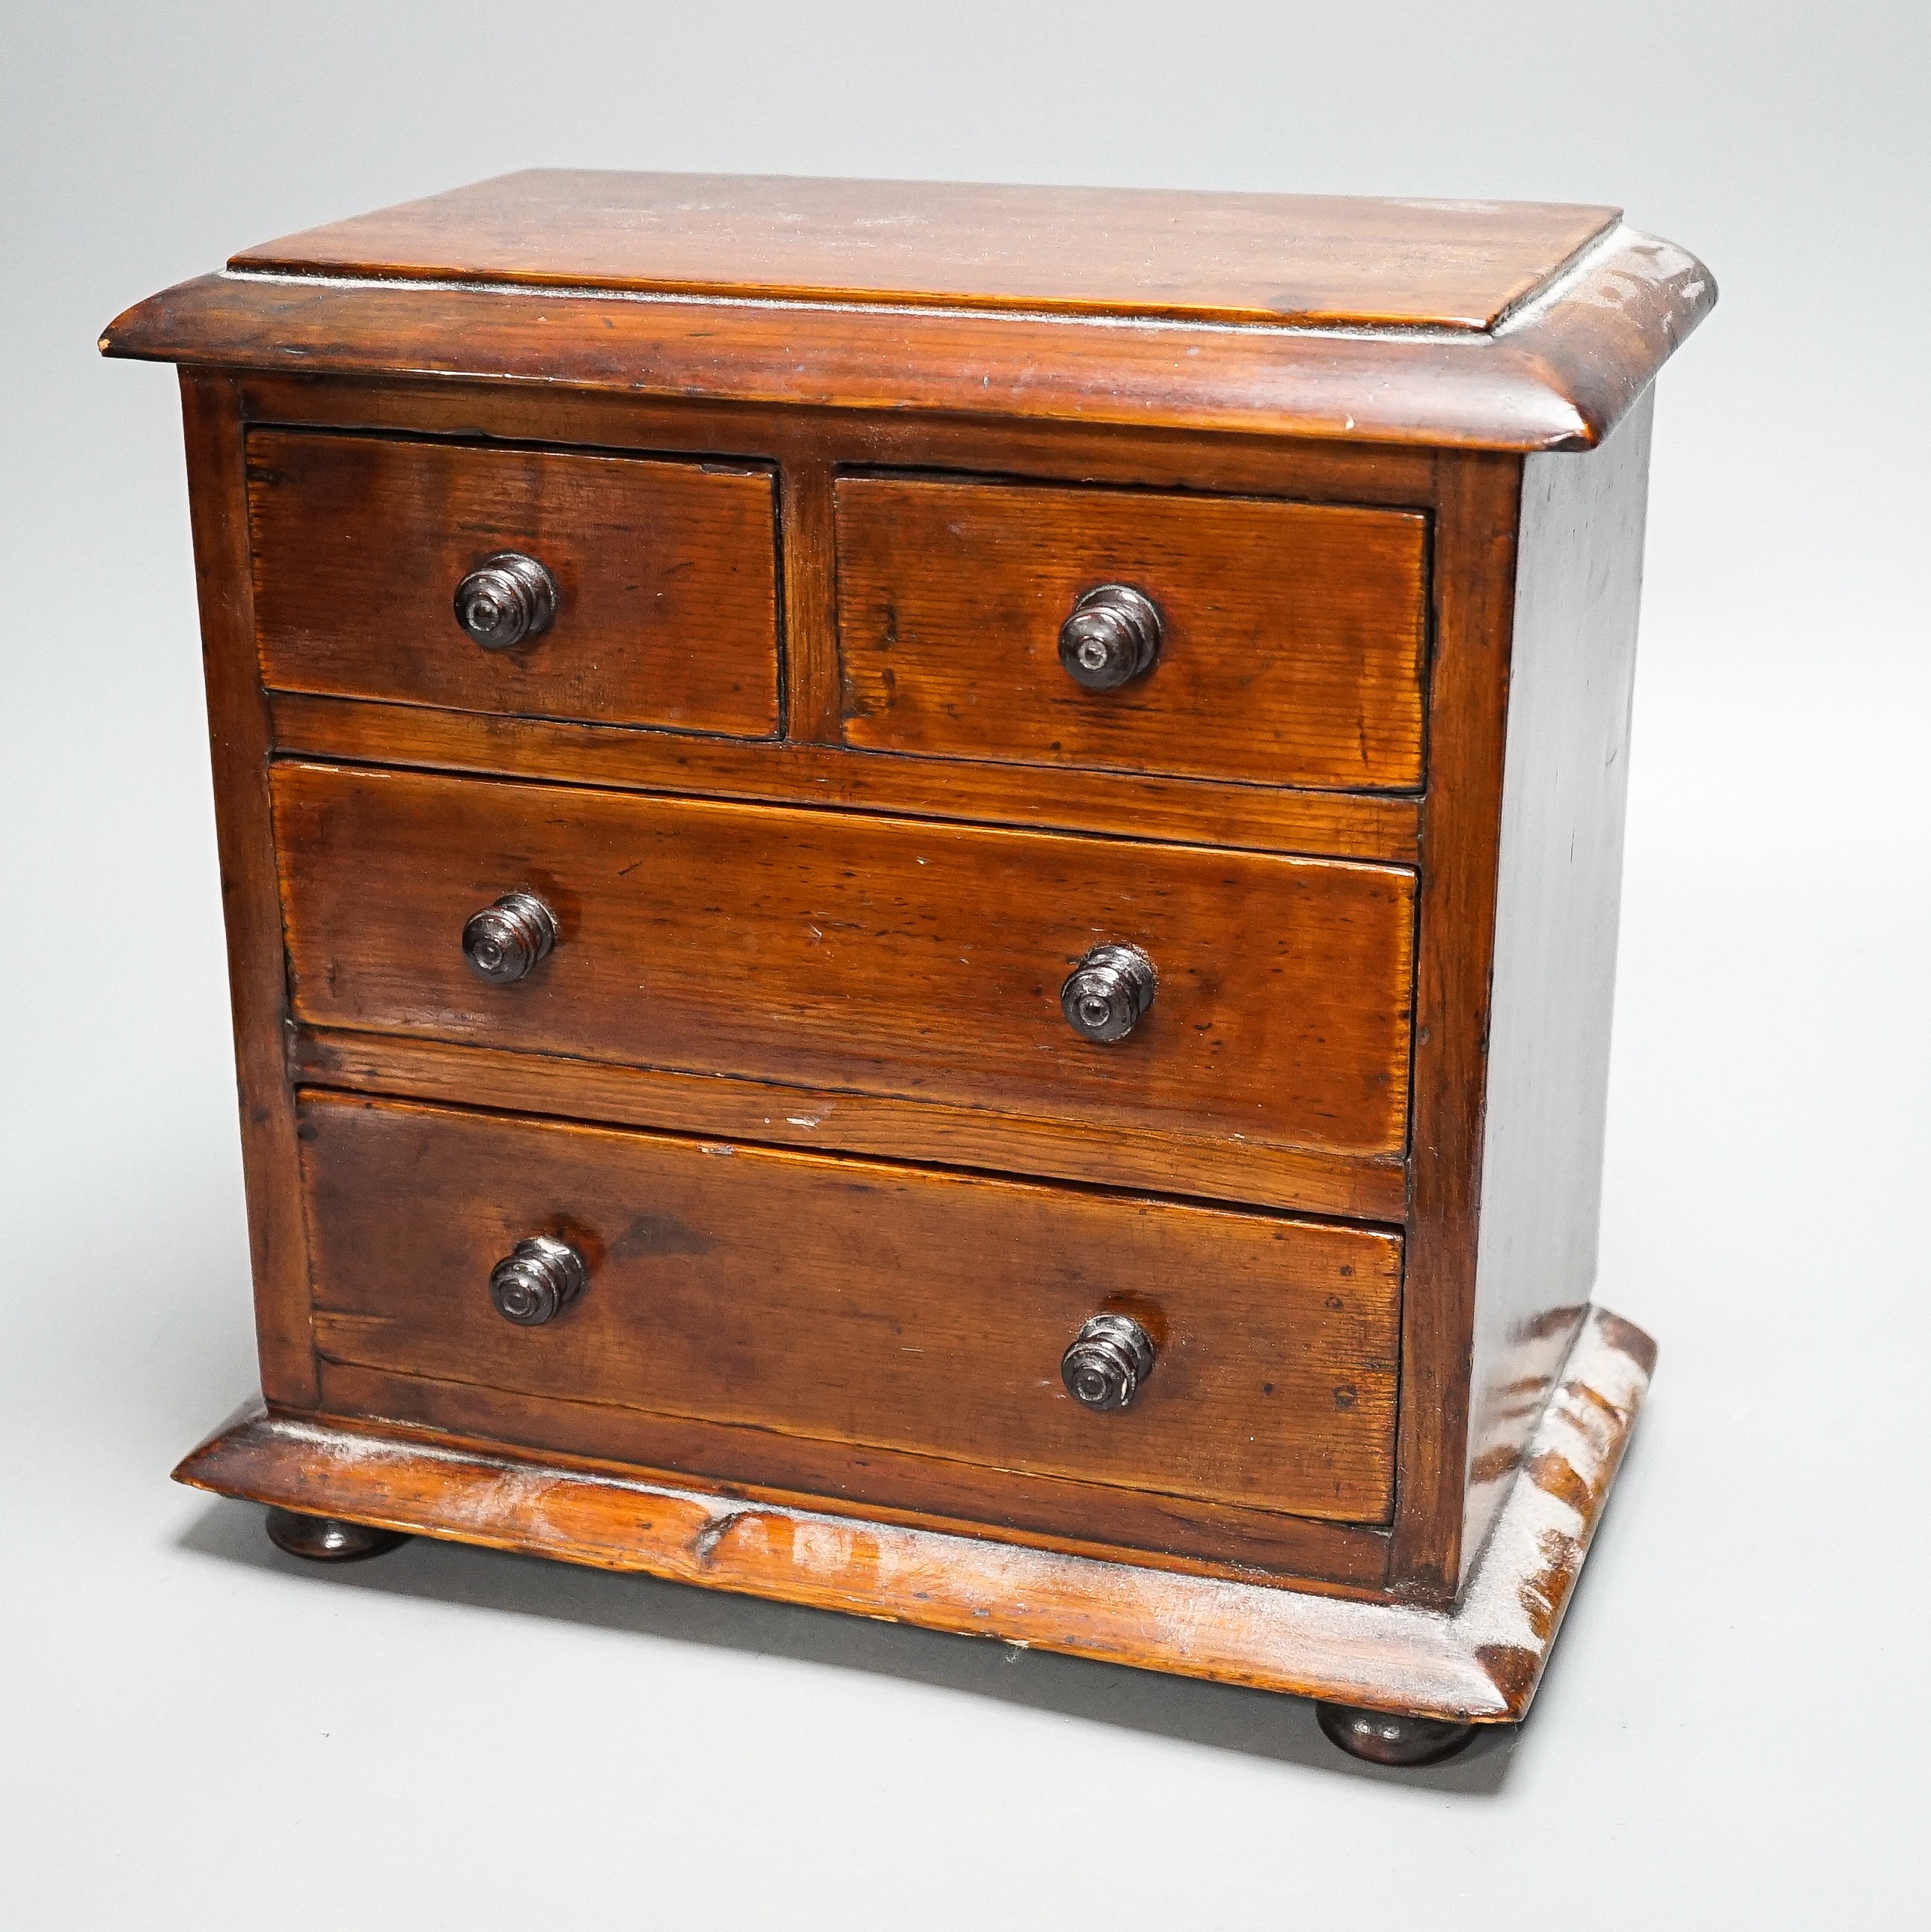 A Victorian stained pine miniature chest of drawers, 27 cms high.